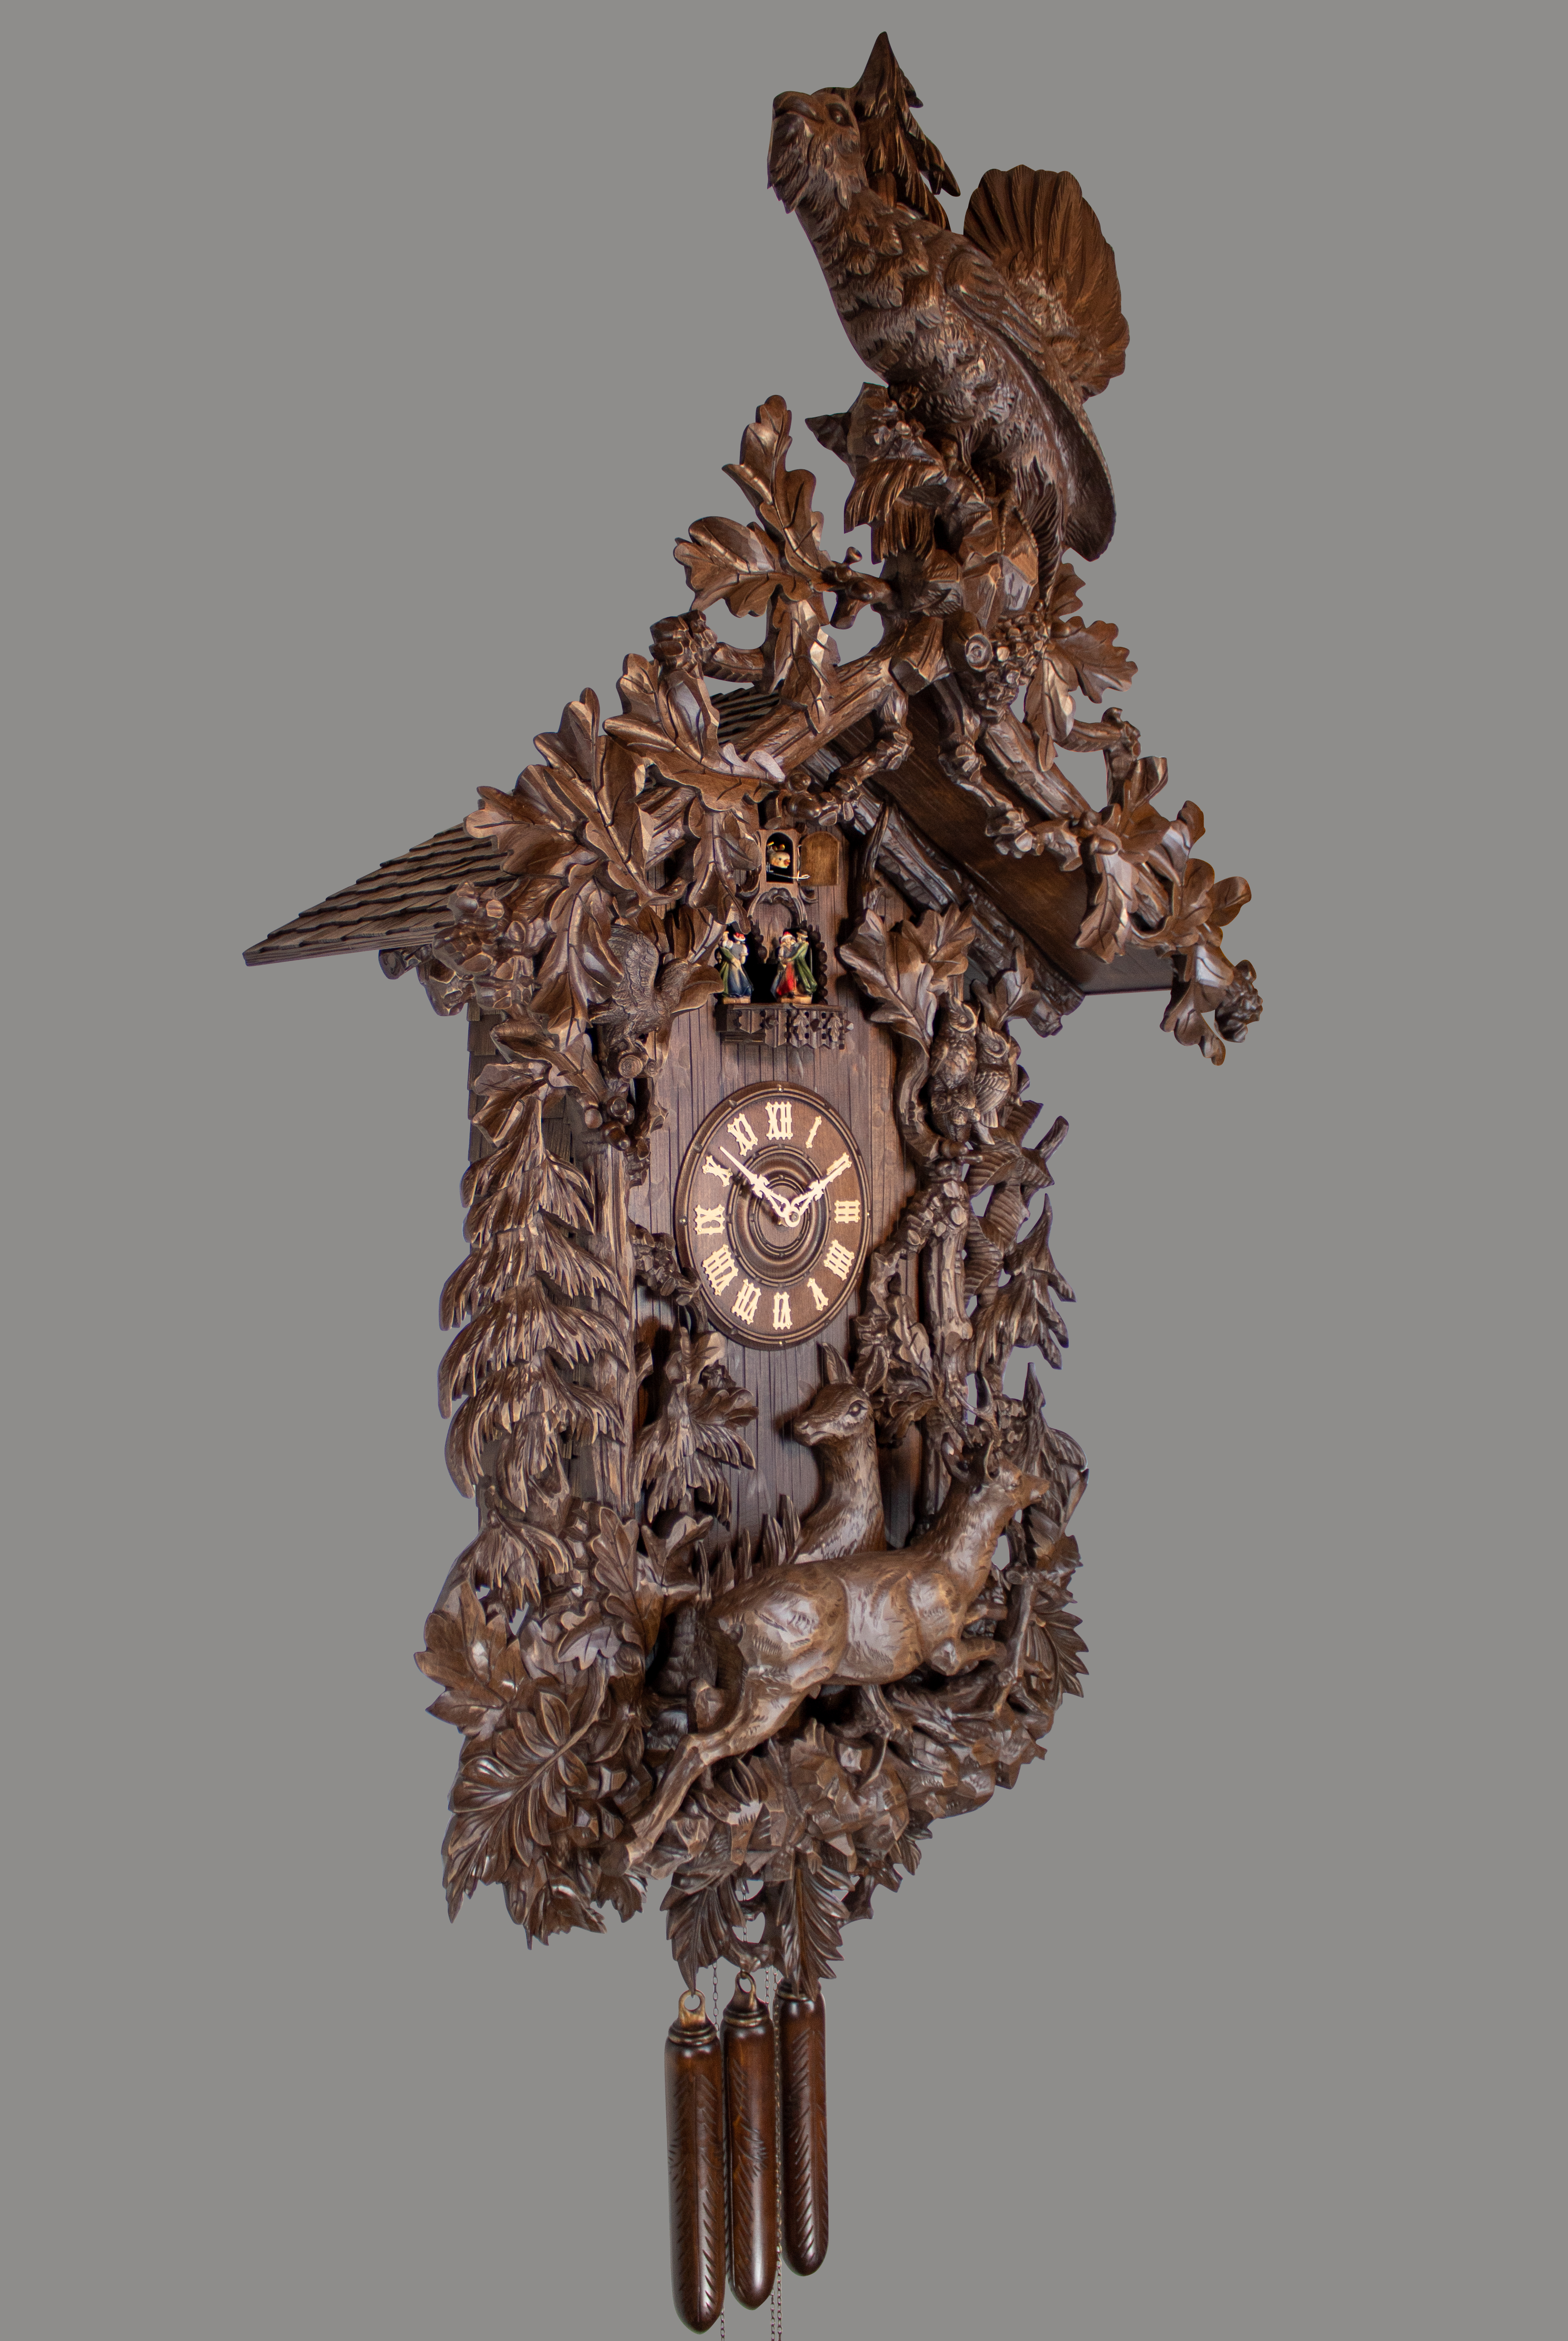 Historical 8 Days Music Dancer Cuckoo Clock with capercaillie and hunting scene with deers